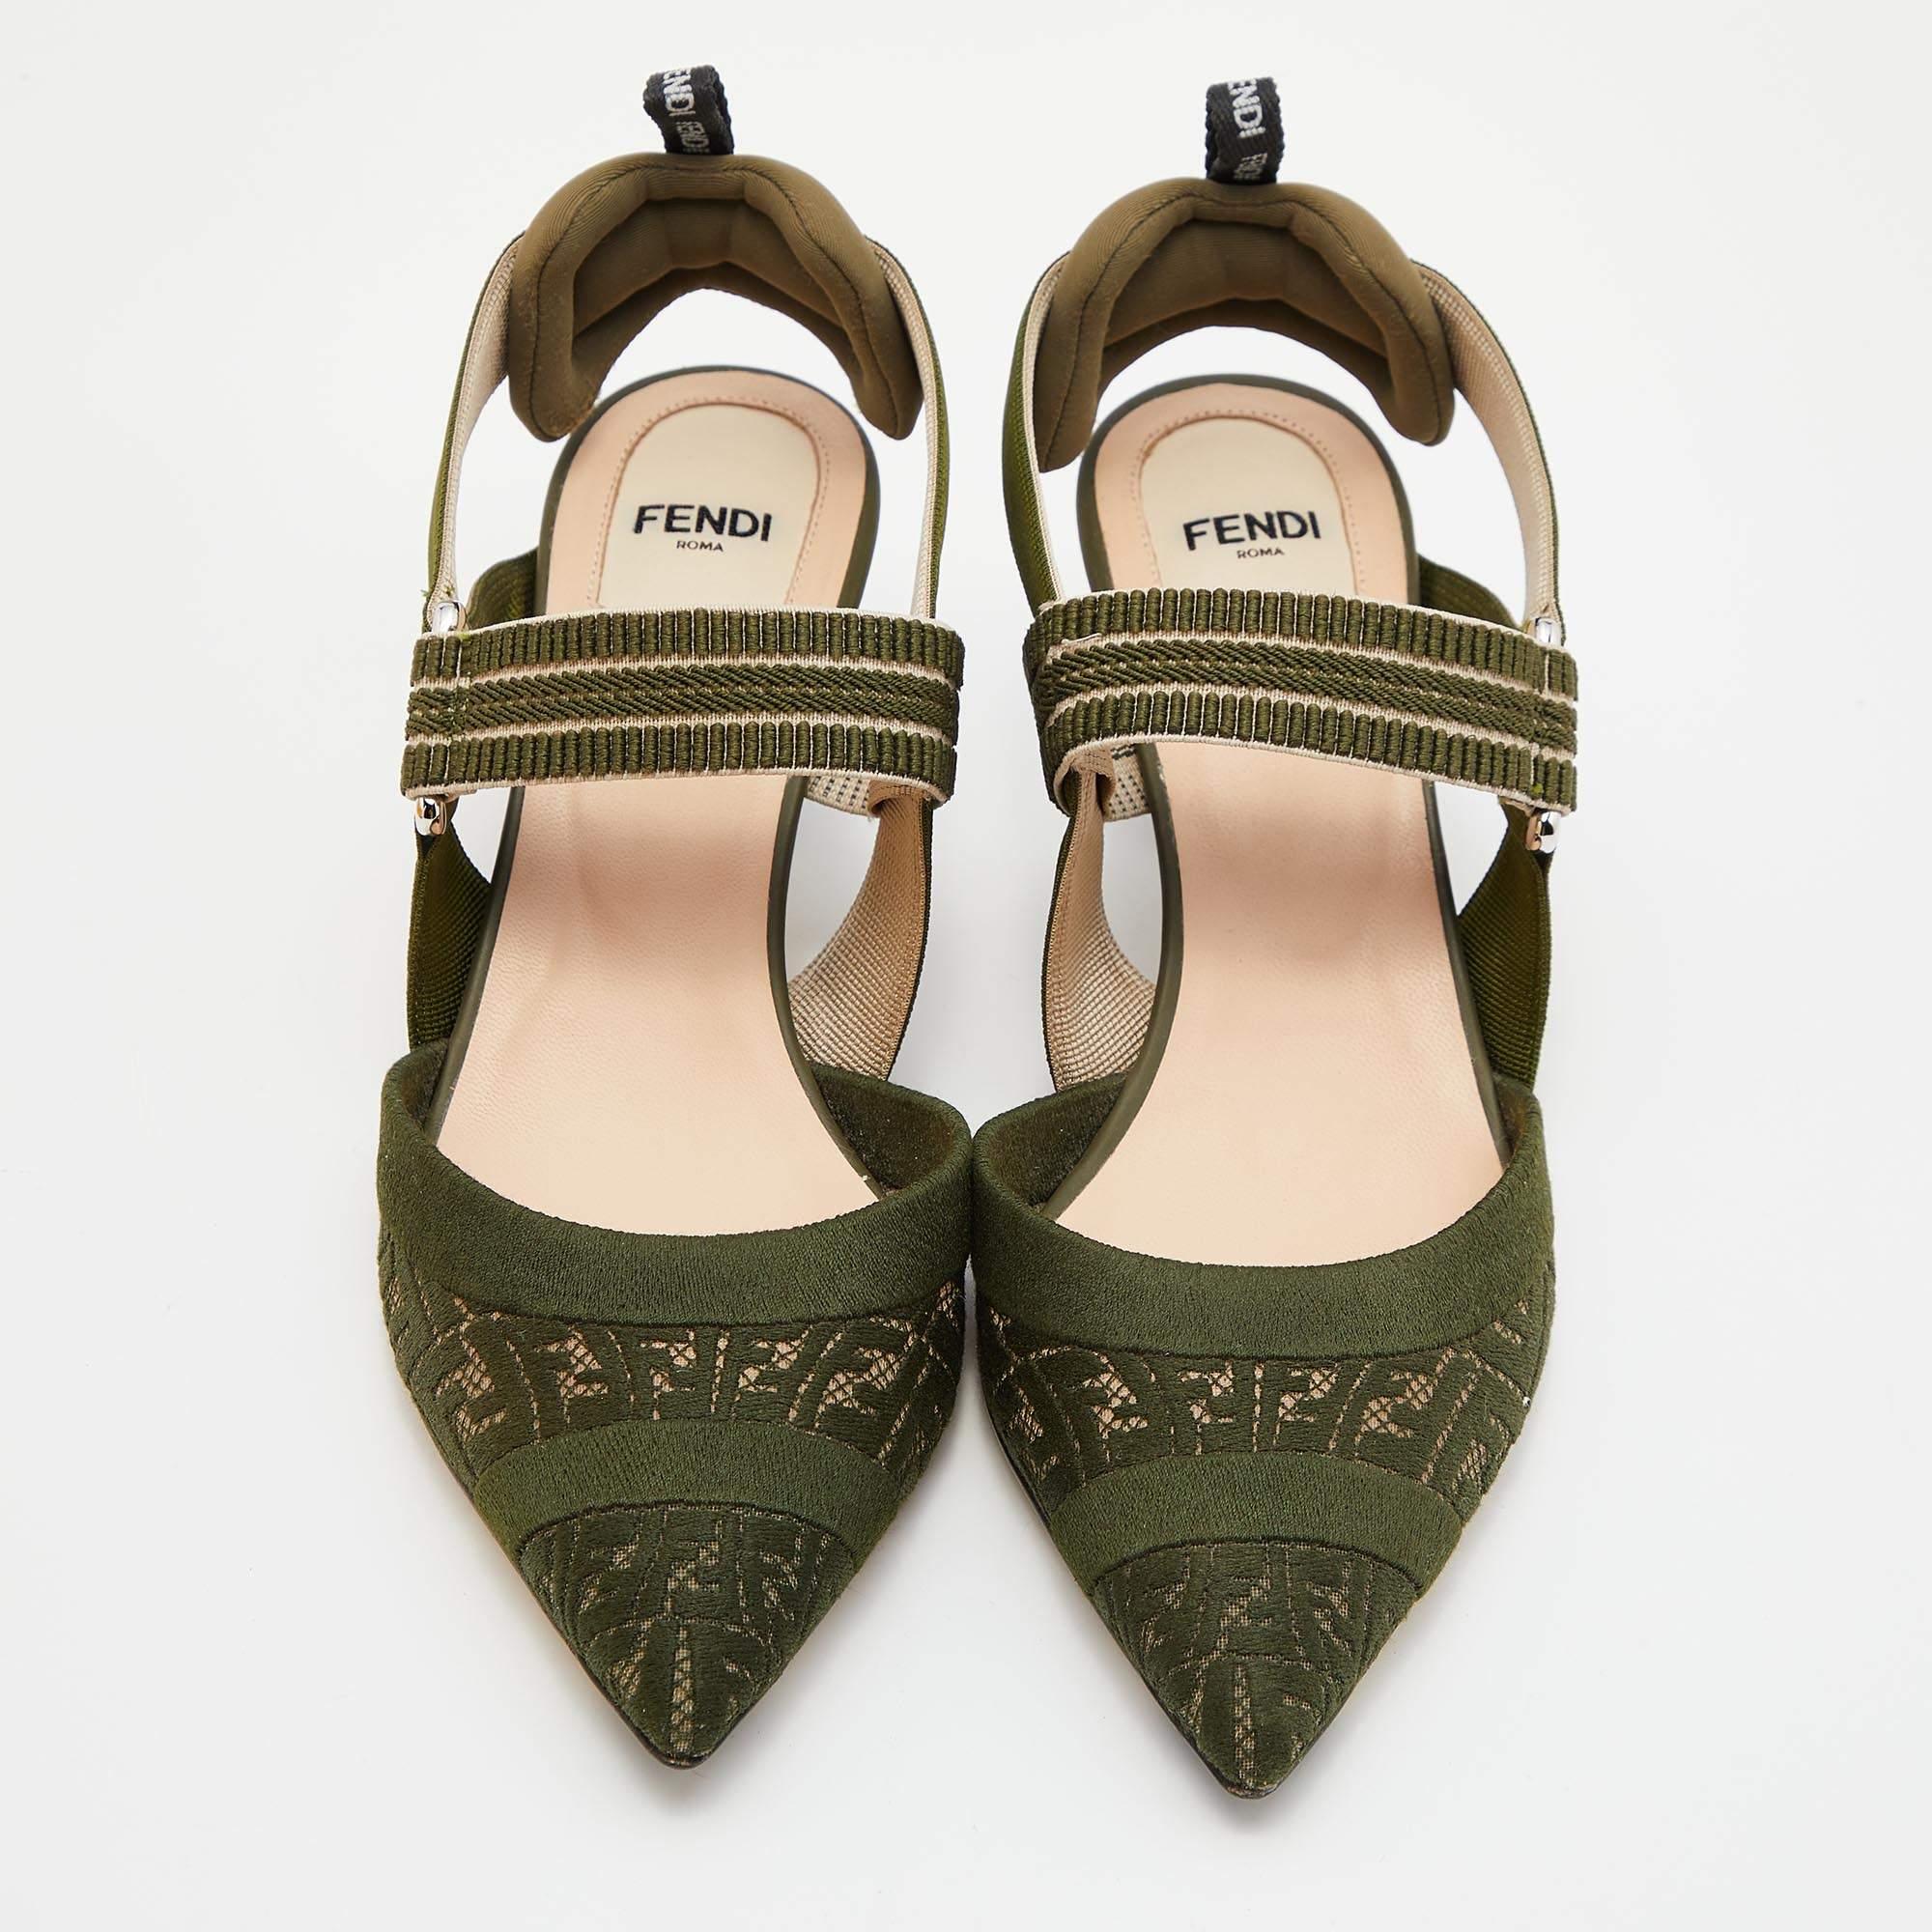 Feminine and luxe, these all-in-ones Colibri pumps by Fendi were first introduced in their SS18 collection, and since then, they are loved by celebrities and influencers worldwide. Crafted from green fabric and nylon, this version features pointed